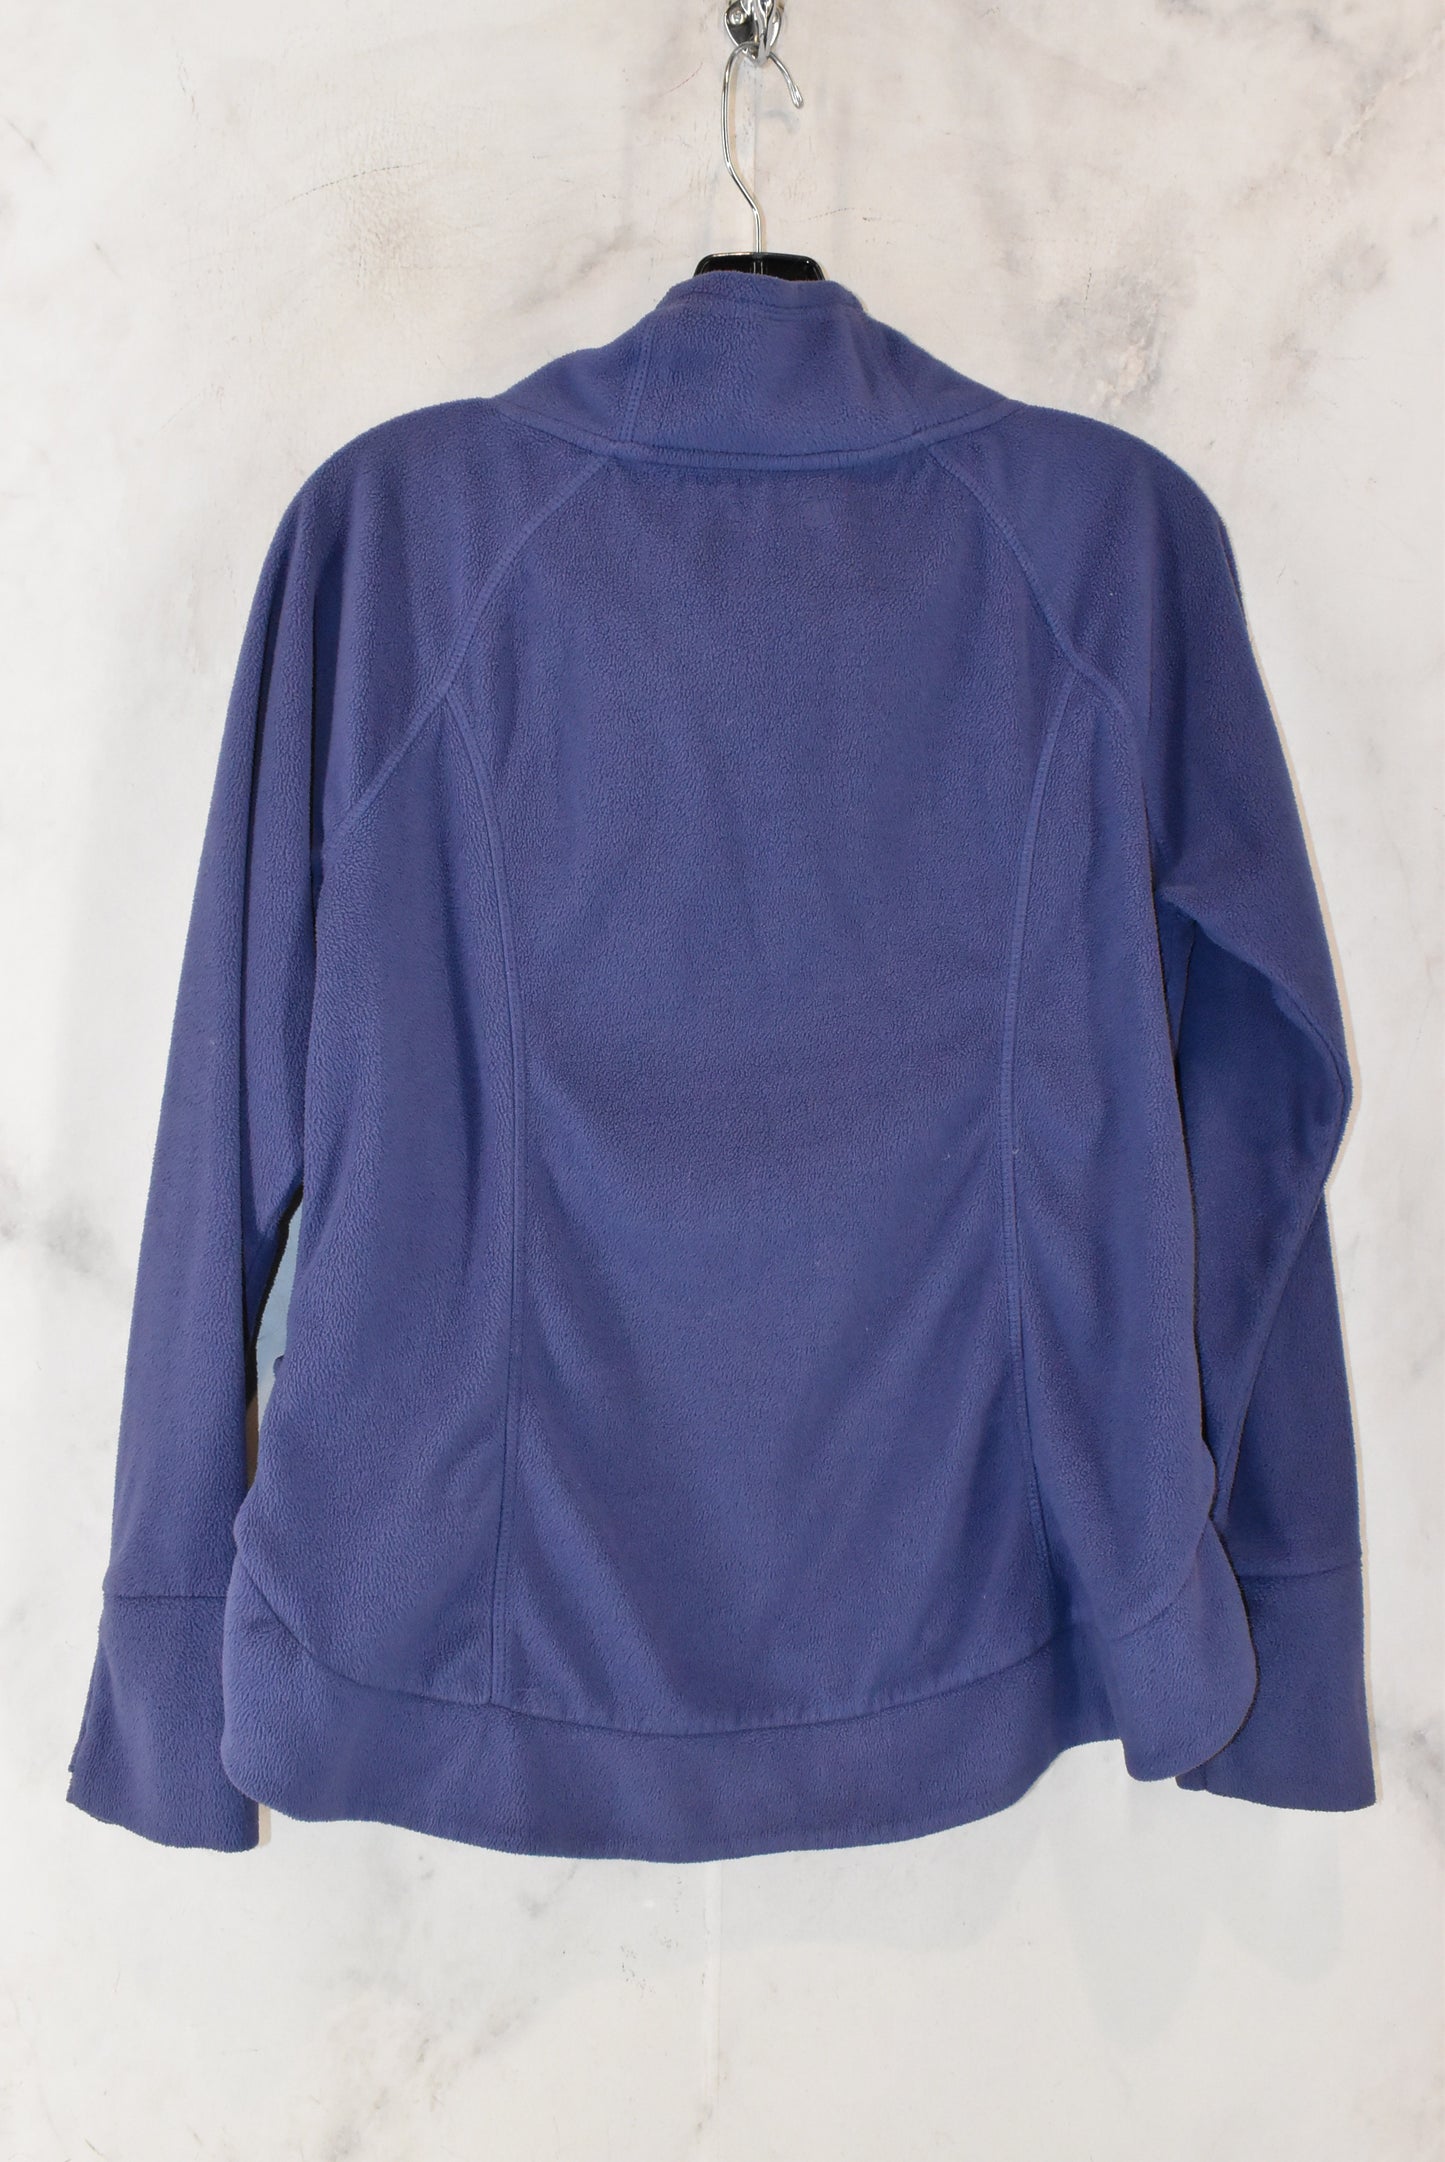 Athletic Fleece By Xersion  Size: M